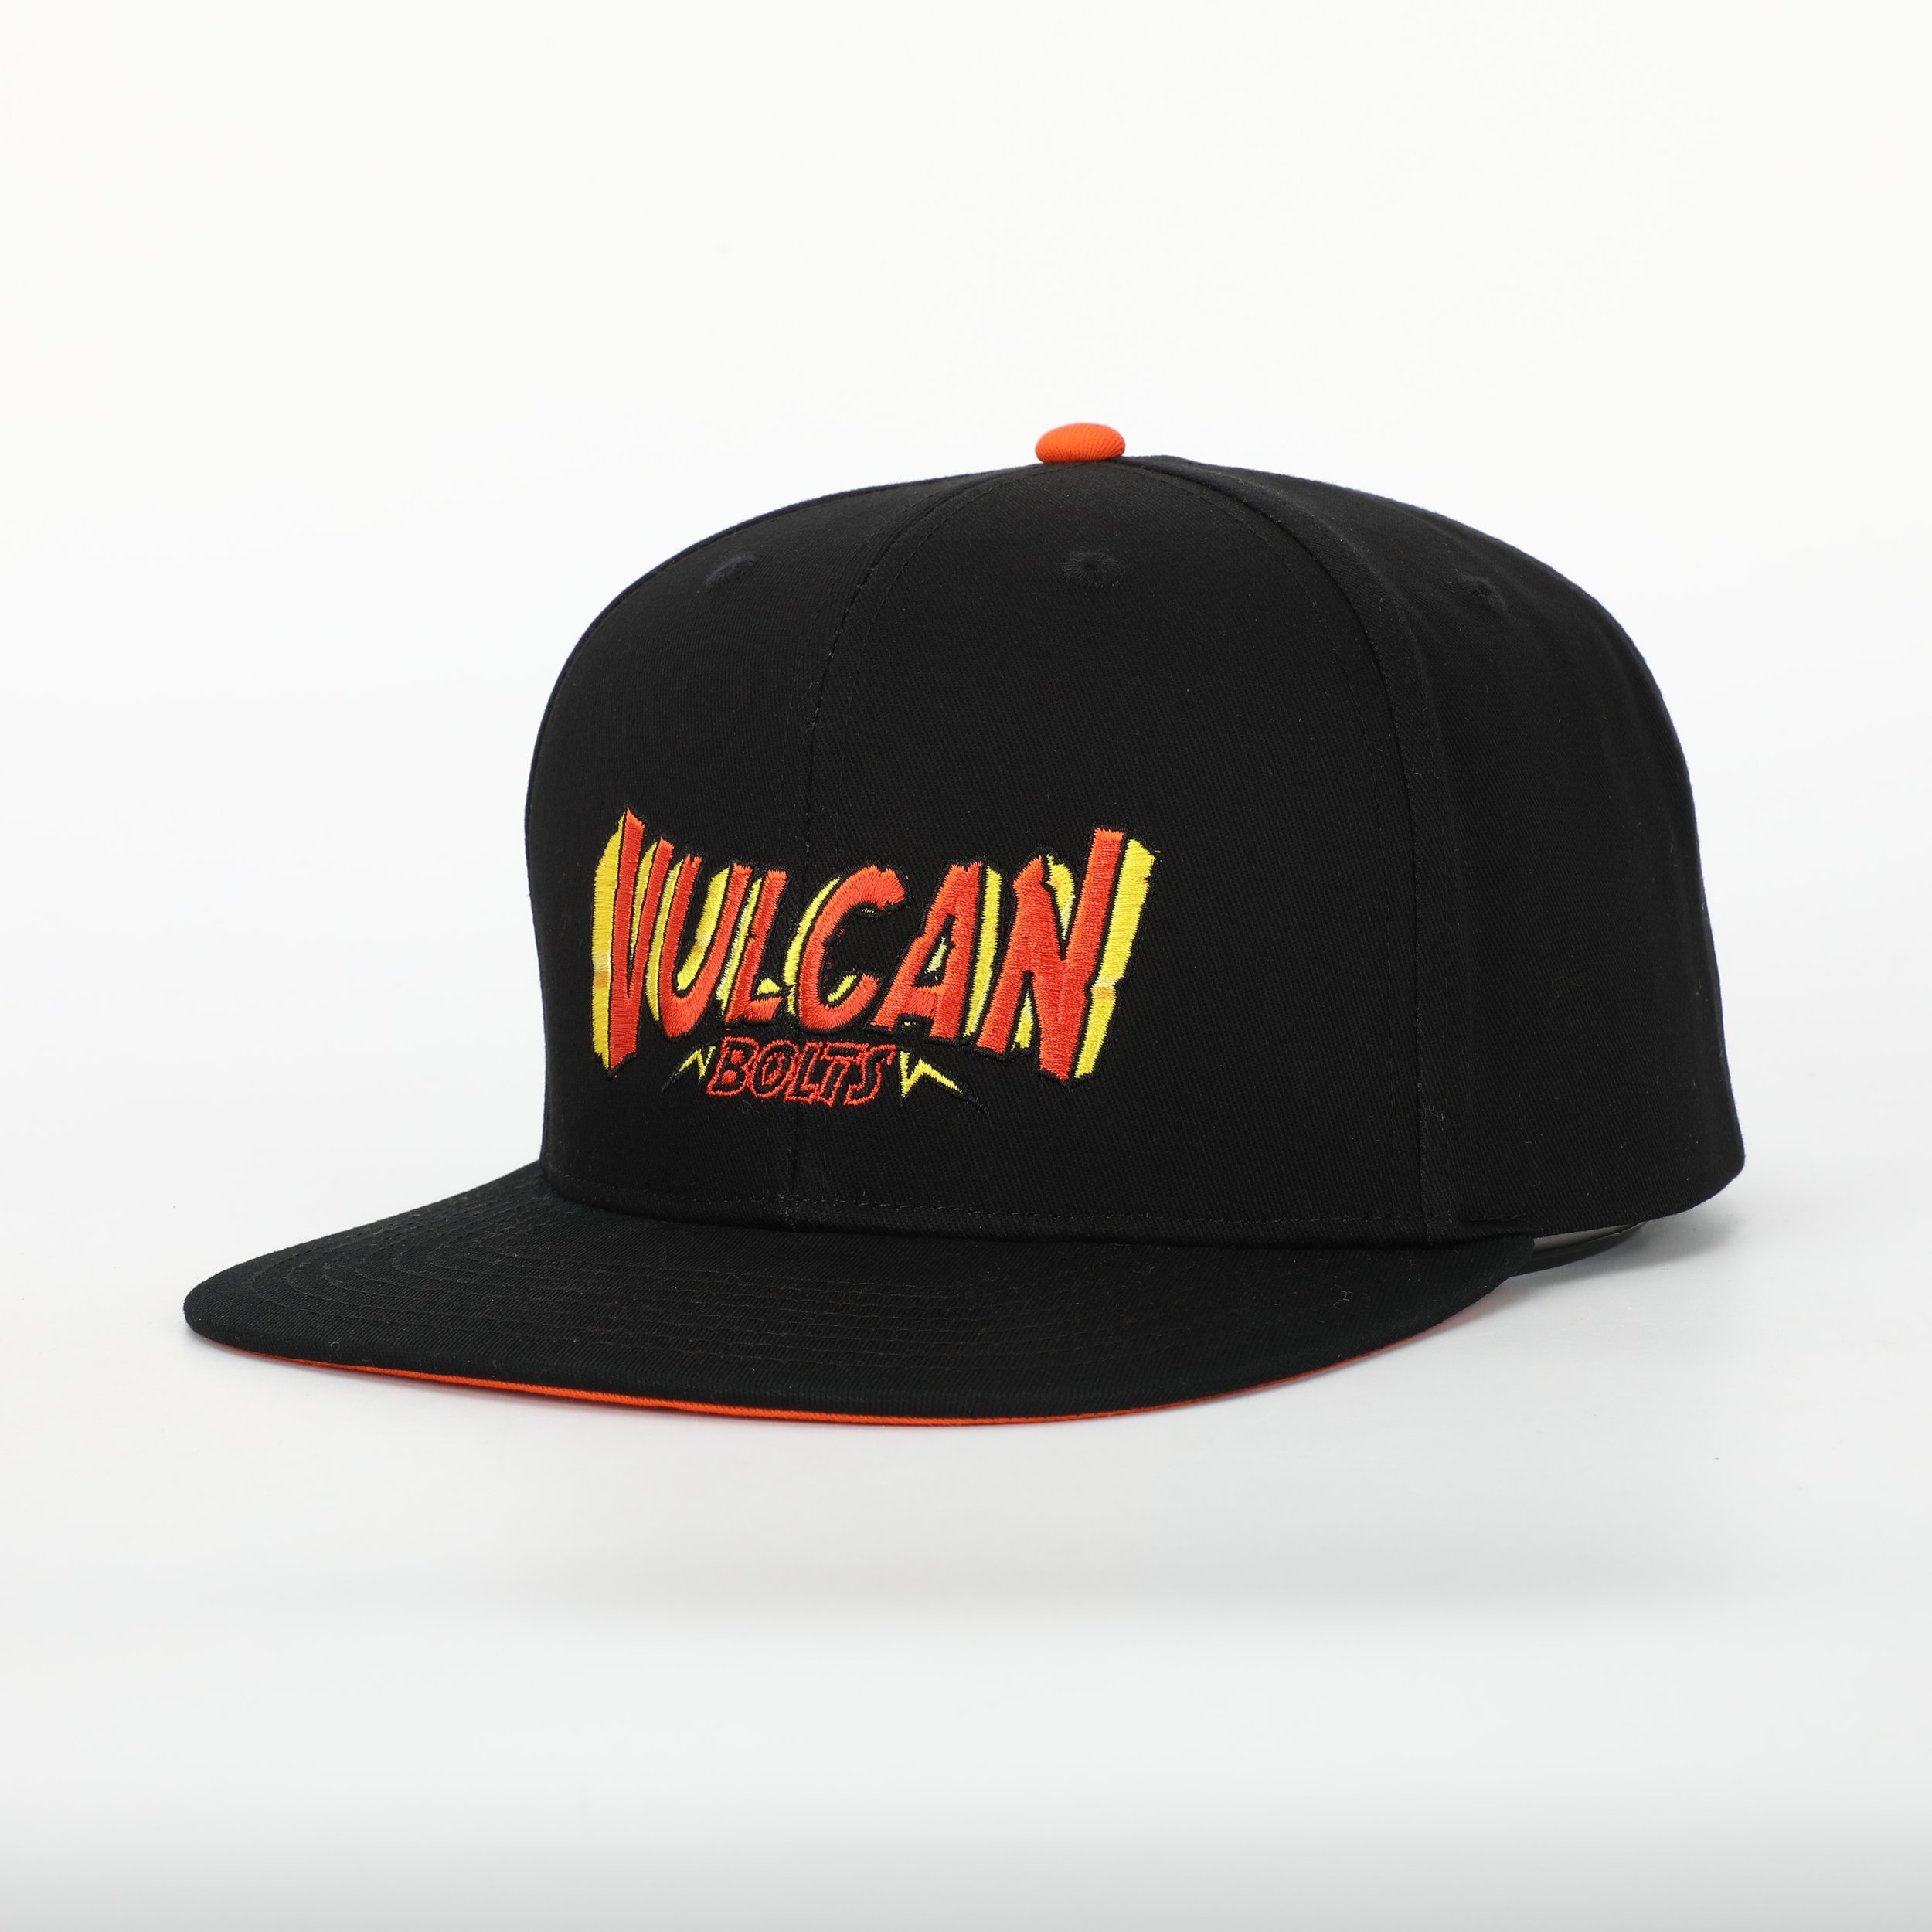 Two New Snapback Hats From Vulcan Bolts — Vulcan Bolts